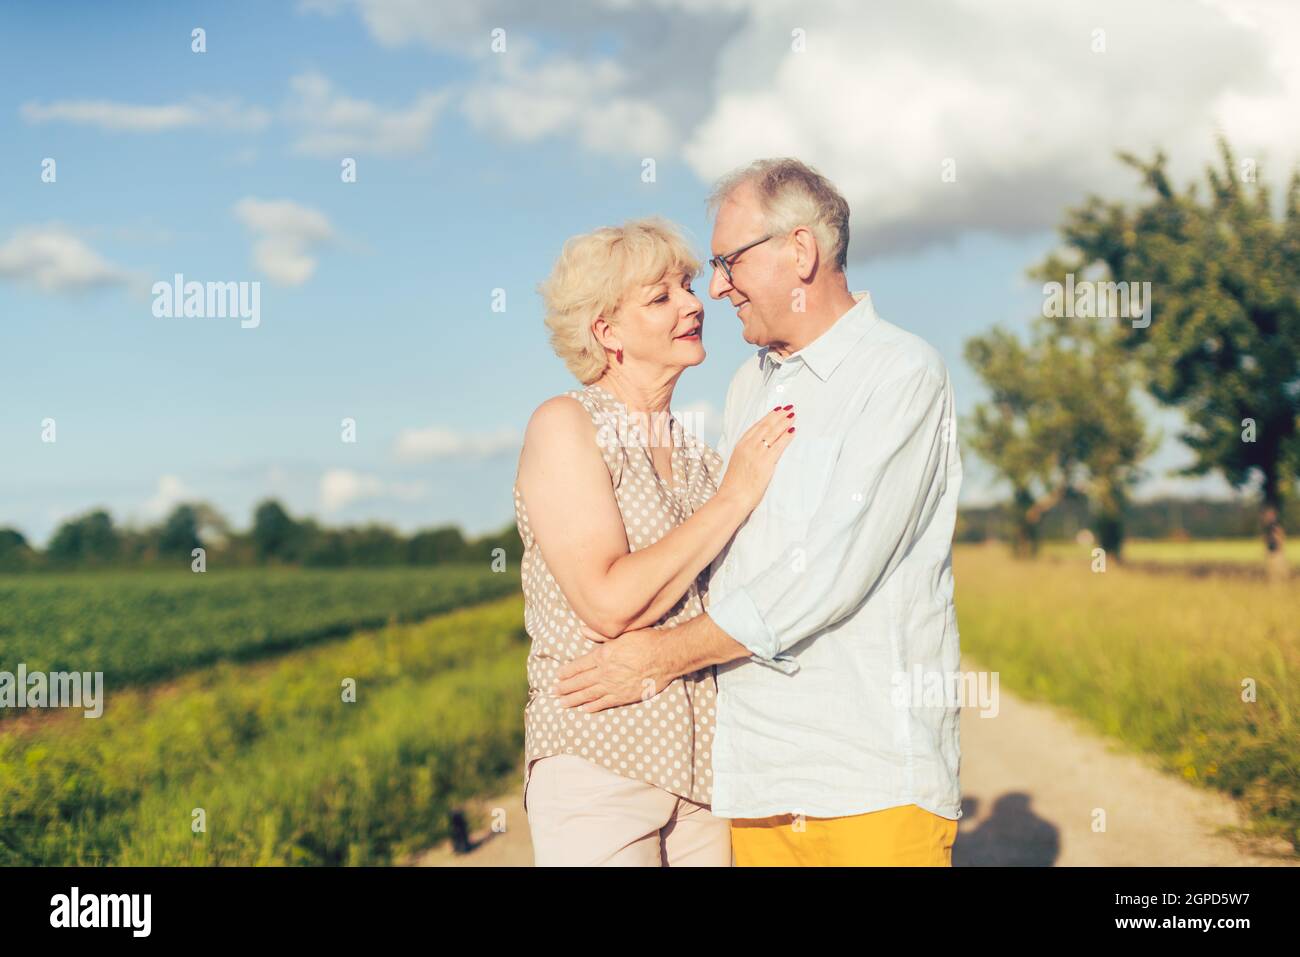 Senior couple embracing each other in love outdoors under a blue sky with Stock Photo